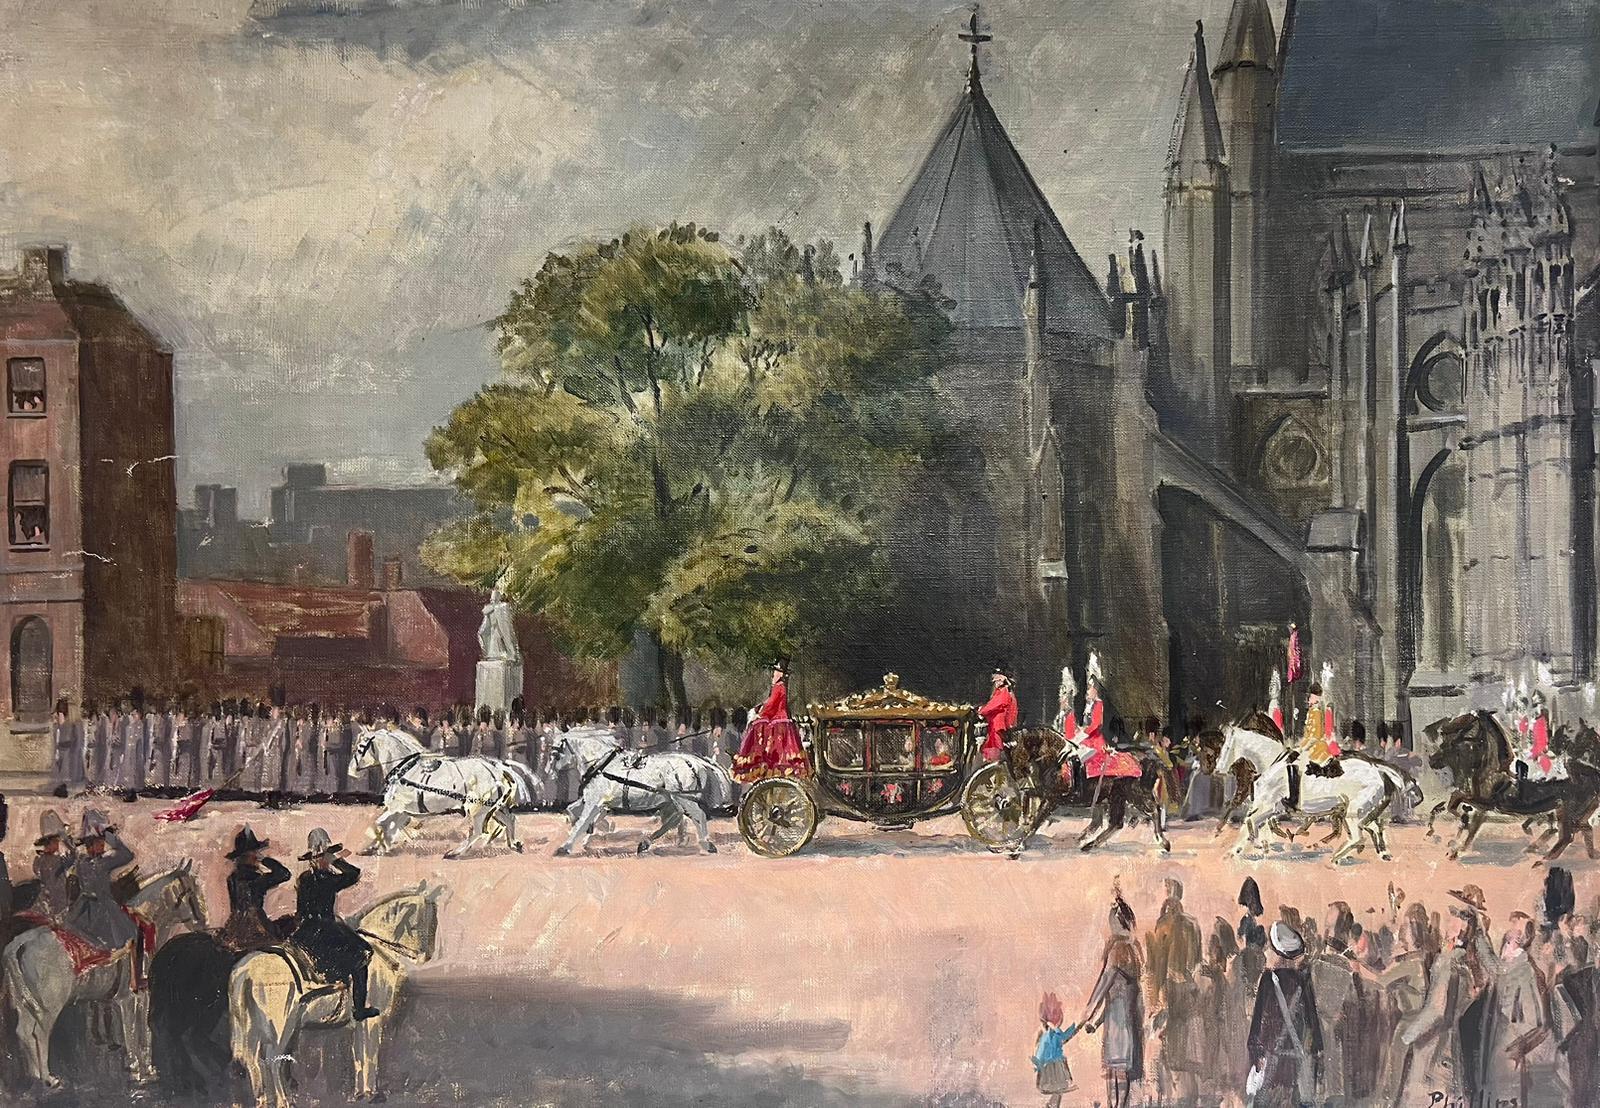 PATRICK EDWARD PHILLIPS  Landscape Painting - The Queen's Coronation 1953 Original British Oil Painting Canvas State Carriage